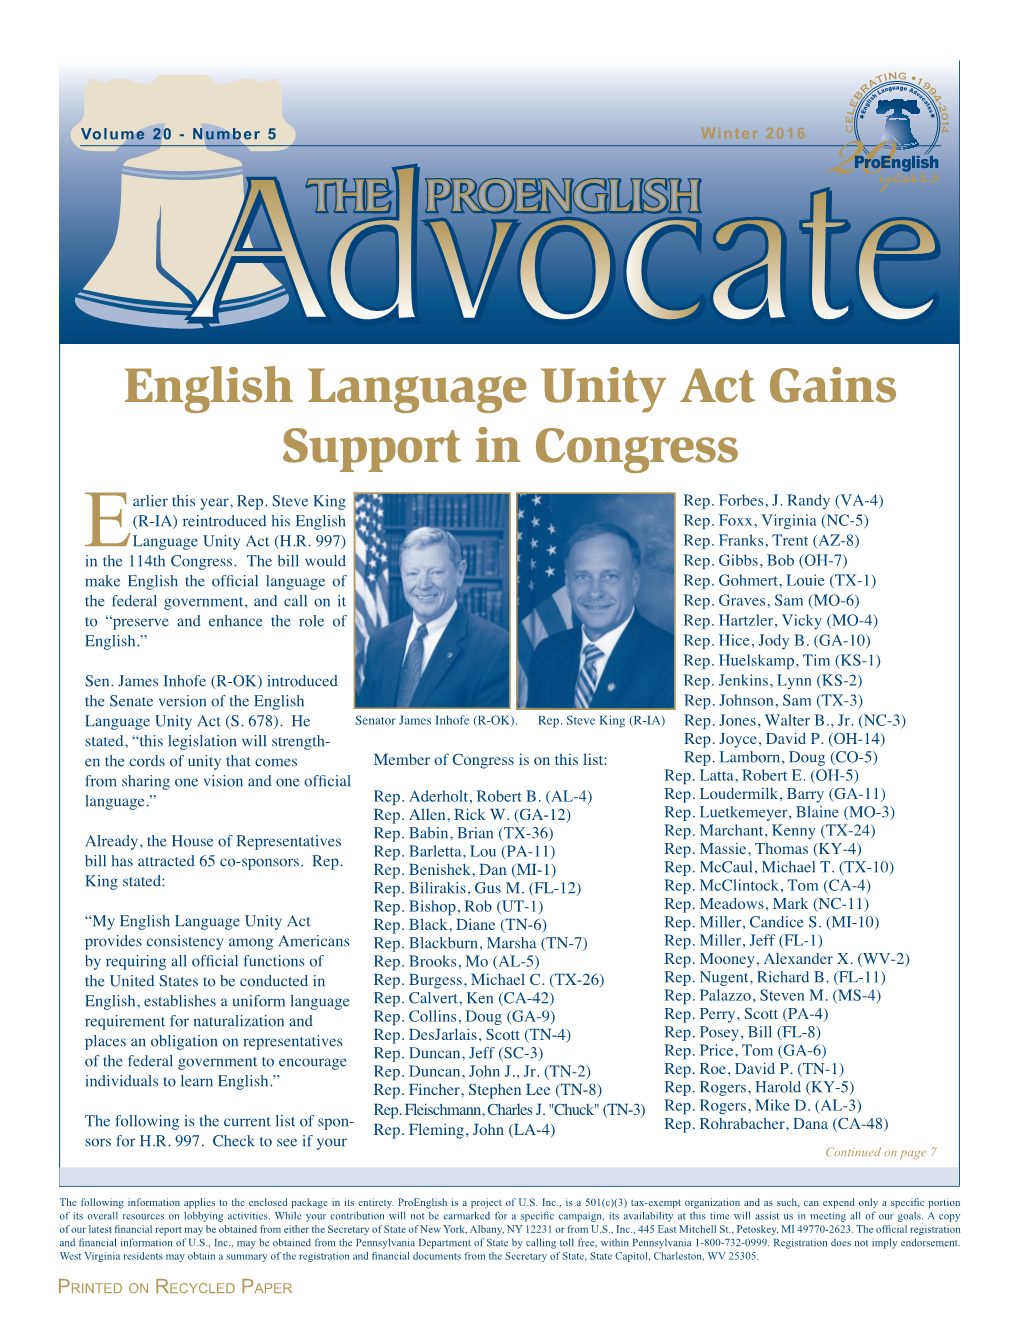 English Language Unity Act Gains Support in Congress